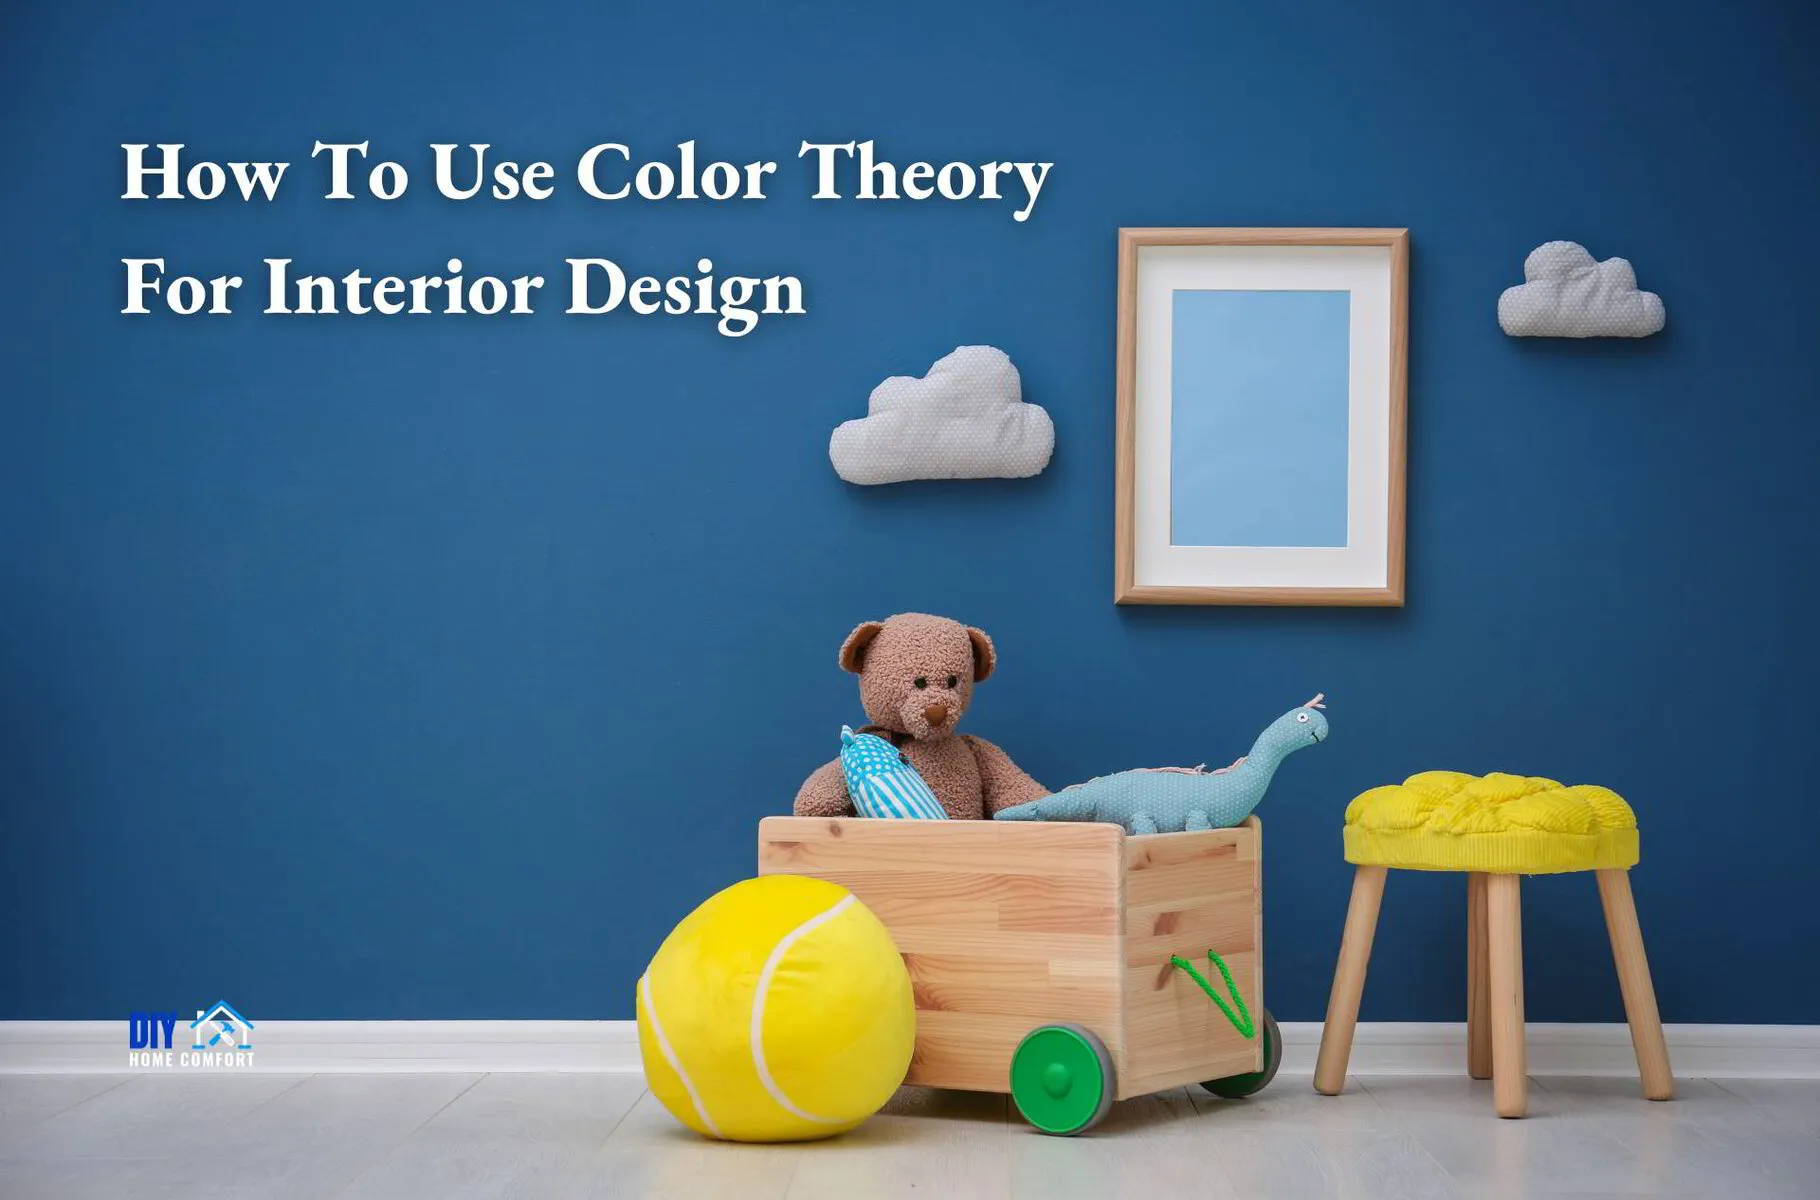 How To Use Color Theory For Interior Design | DIY Home Comfort